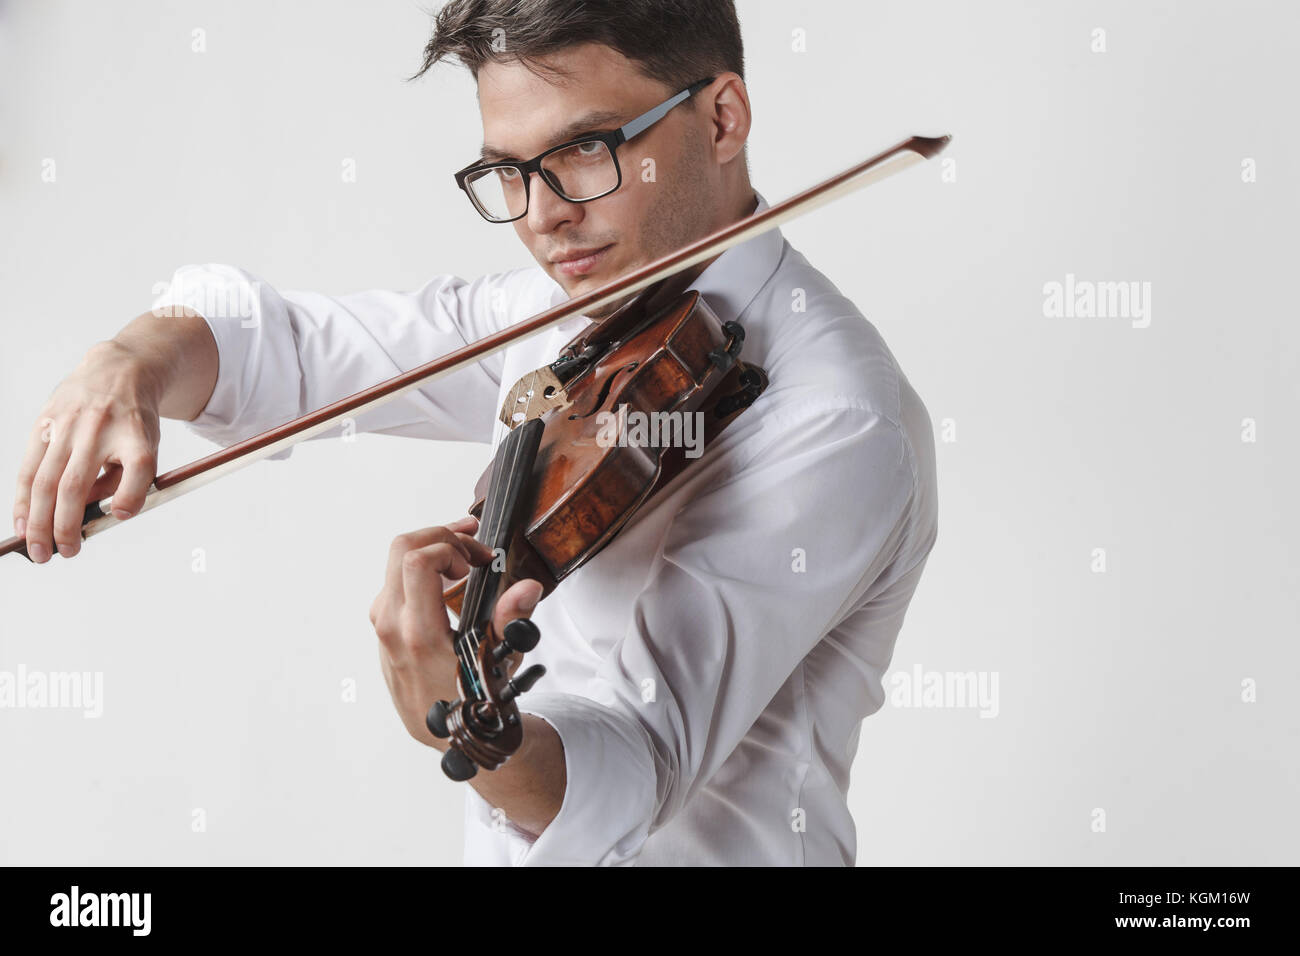 Certain young man playing violin against white background Banque D'Images